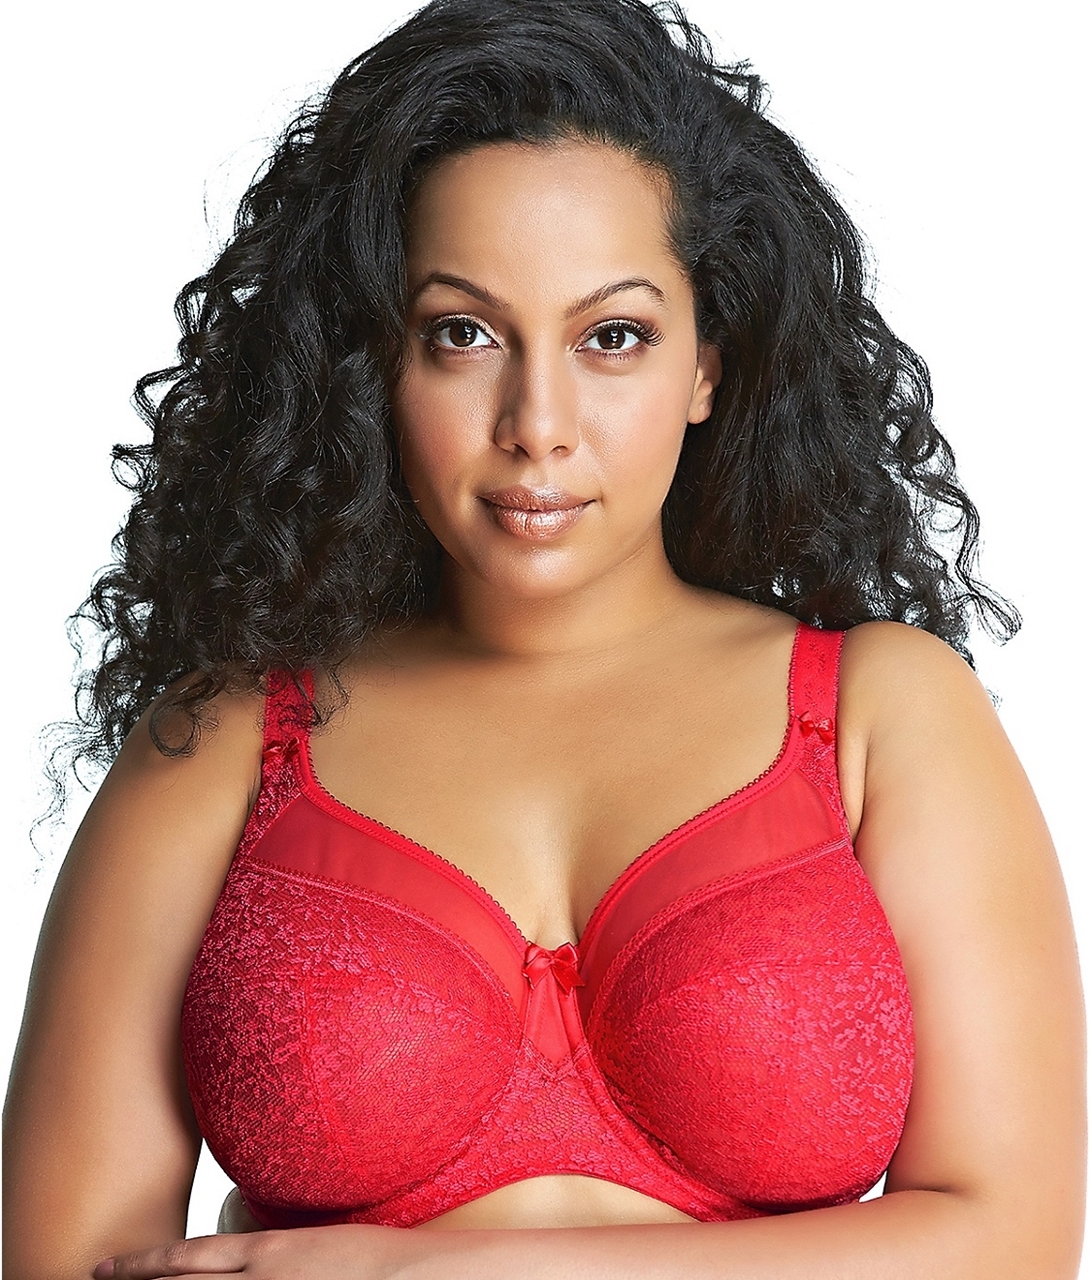 Looking for the Lilyette #908 bra? We can help! 